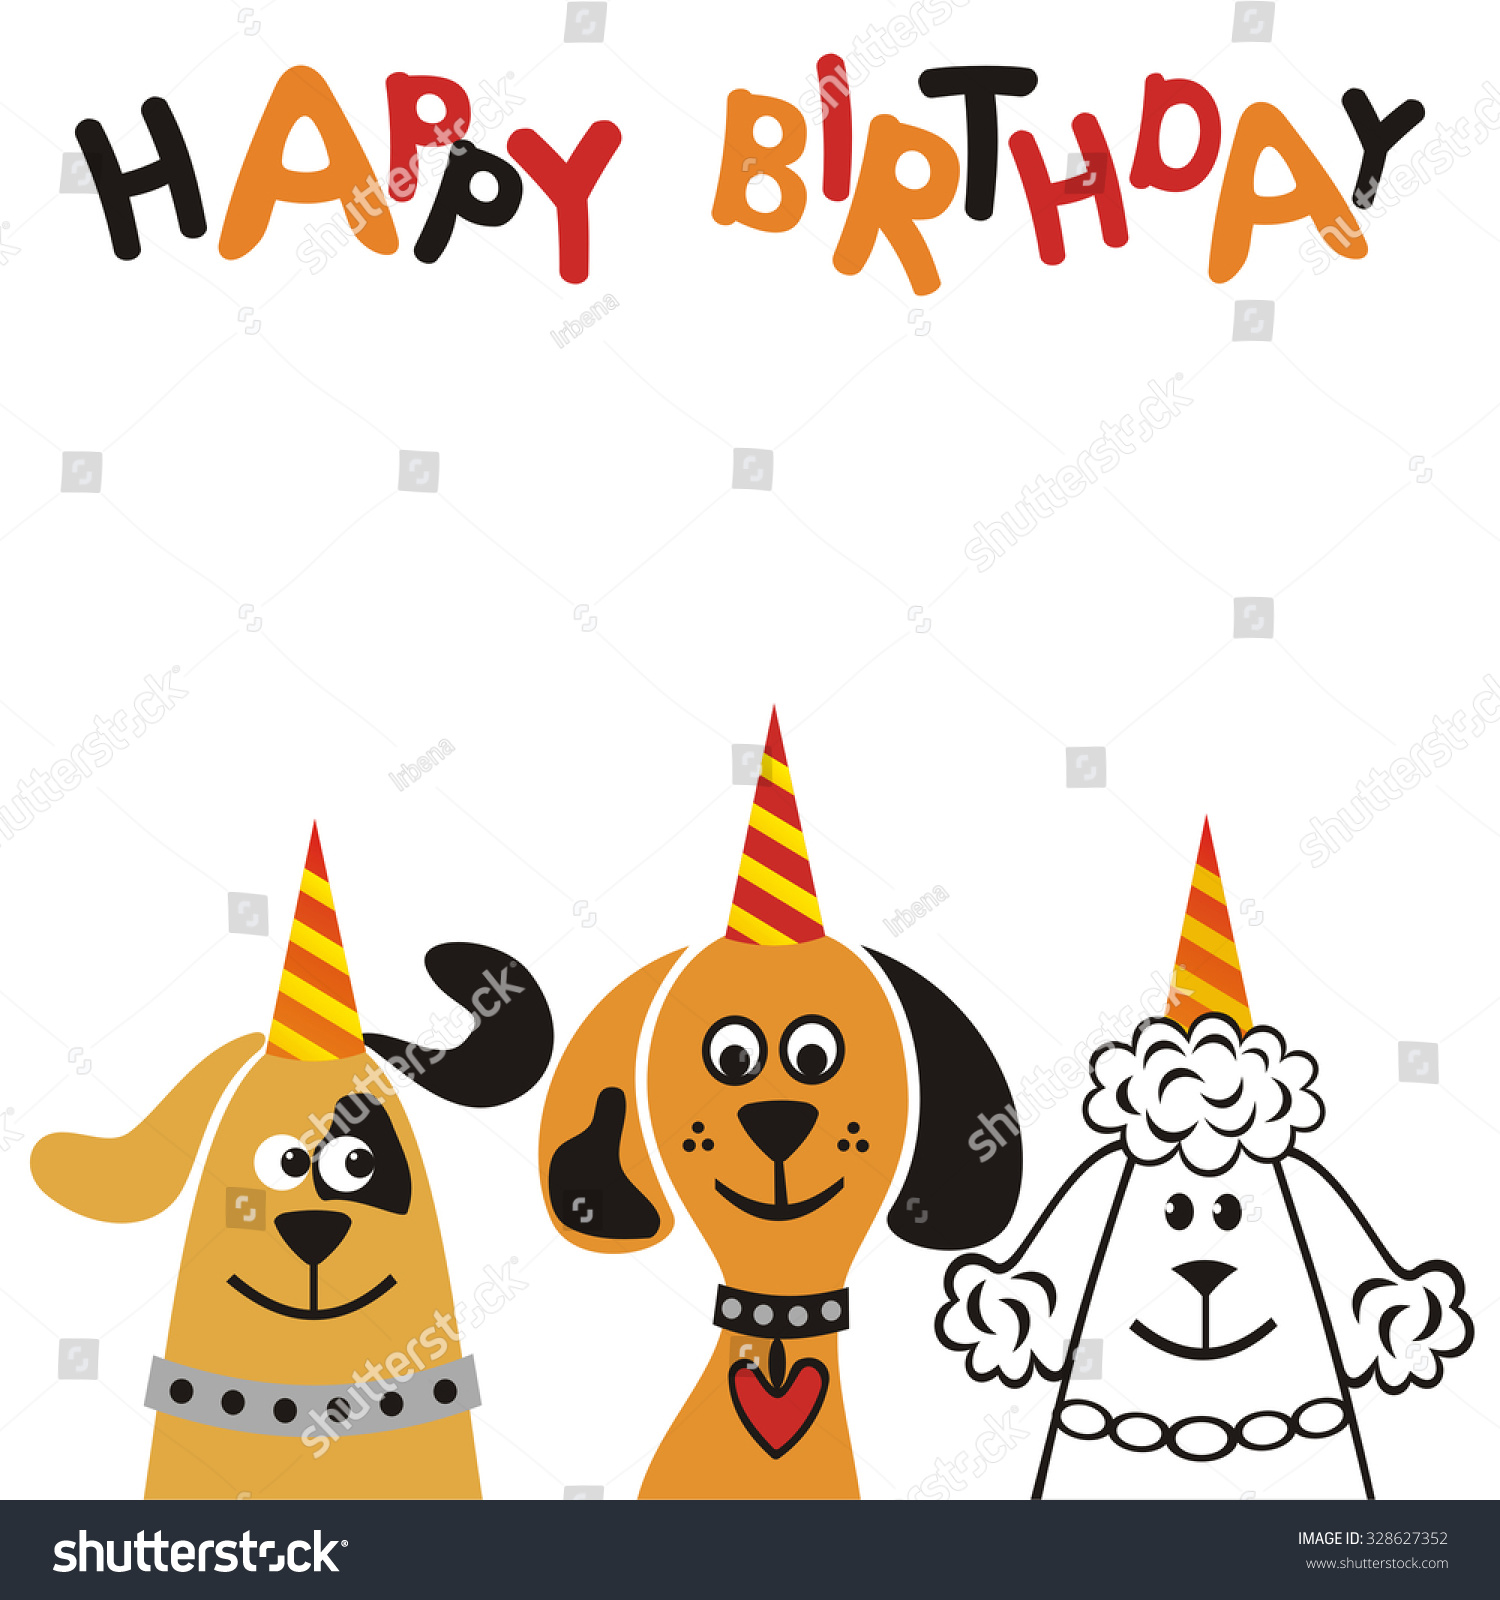 Happy Birthday Greeting Card With Cute Dogs Vector Illustration - 328627352 : Shutterstock